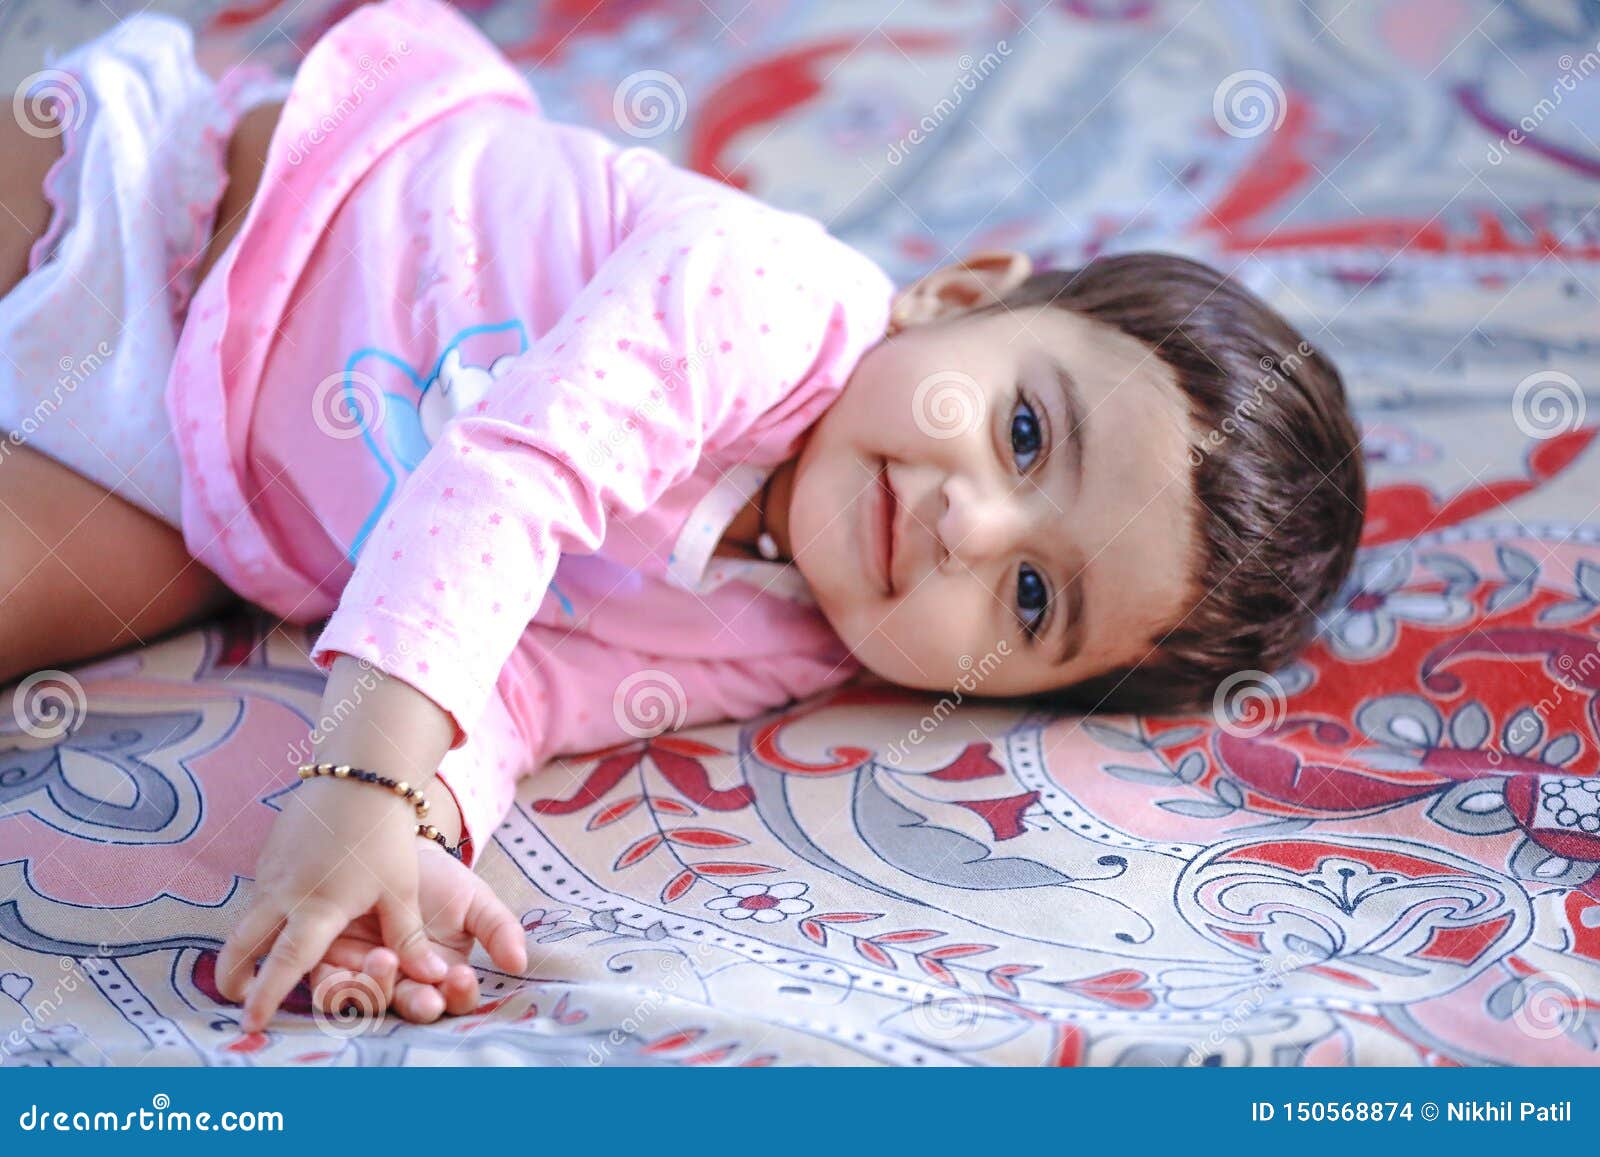 Cute Indian baby girl stock photo. Image of happy, beauty - 150568874